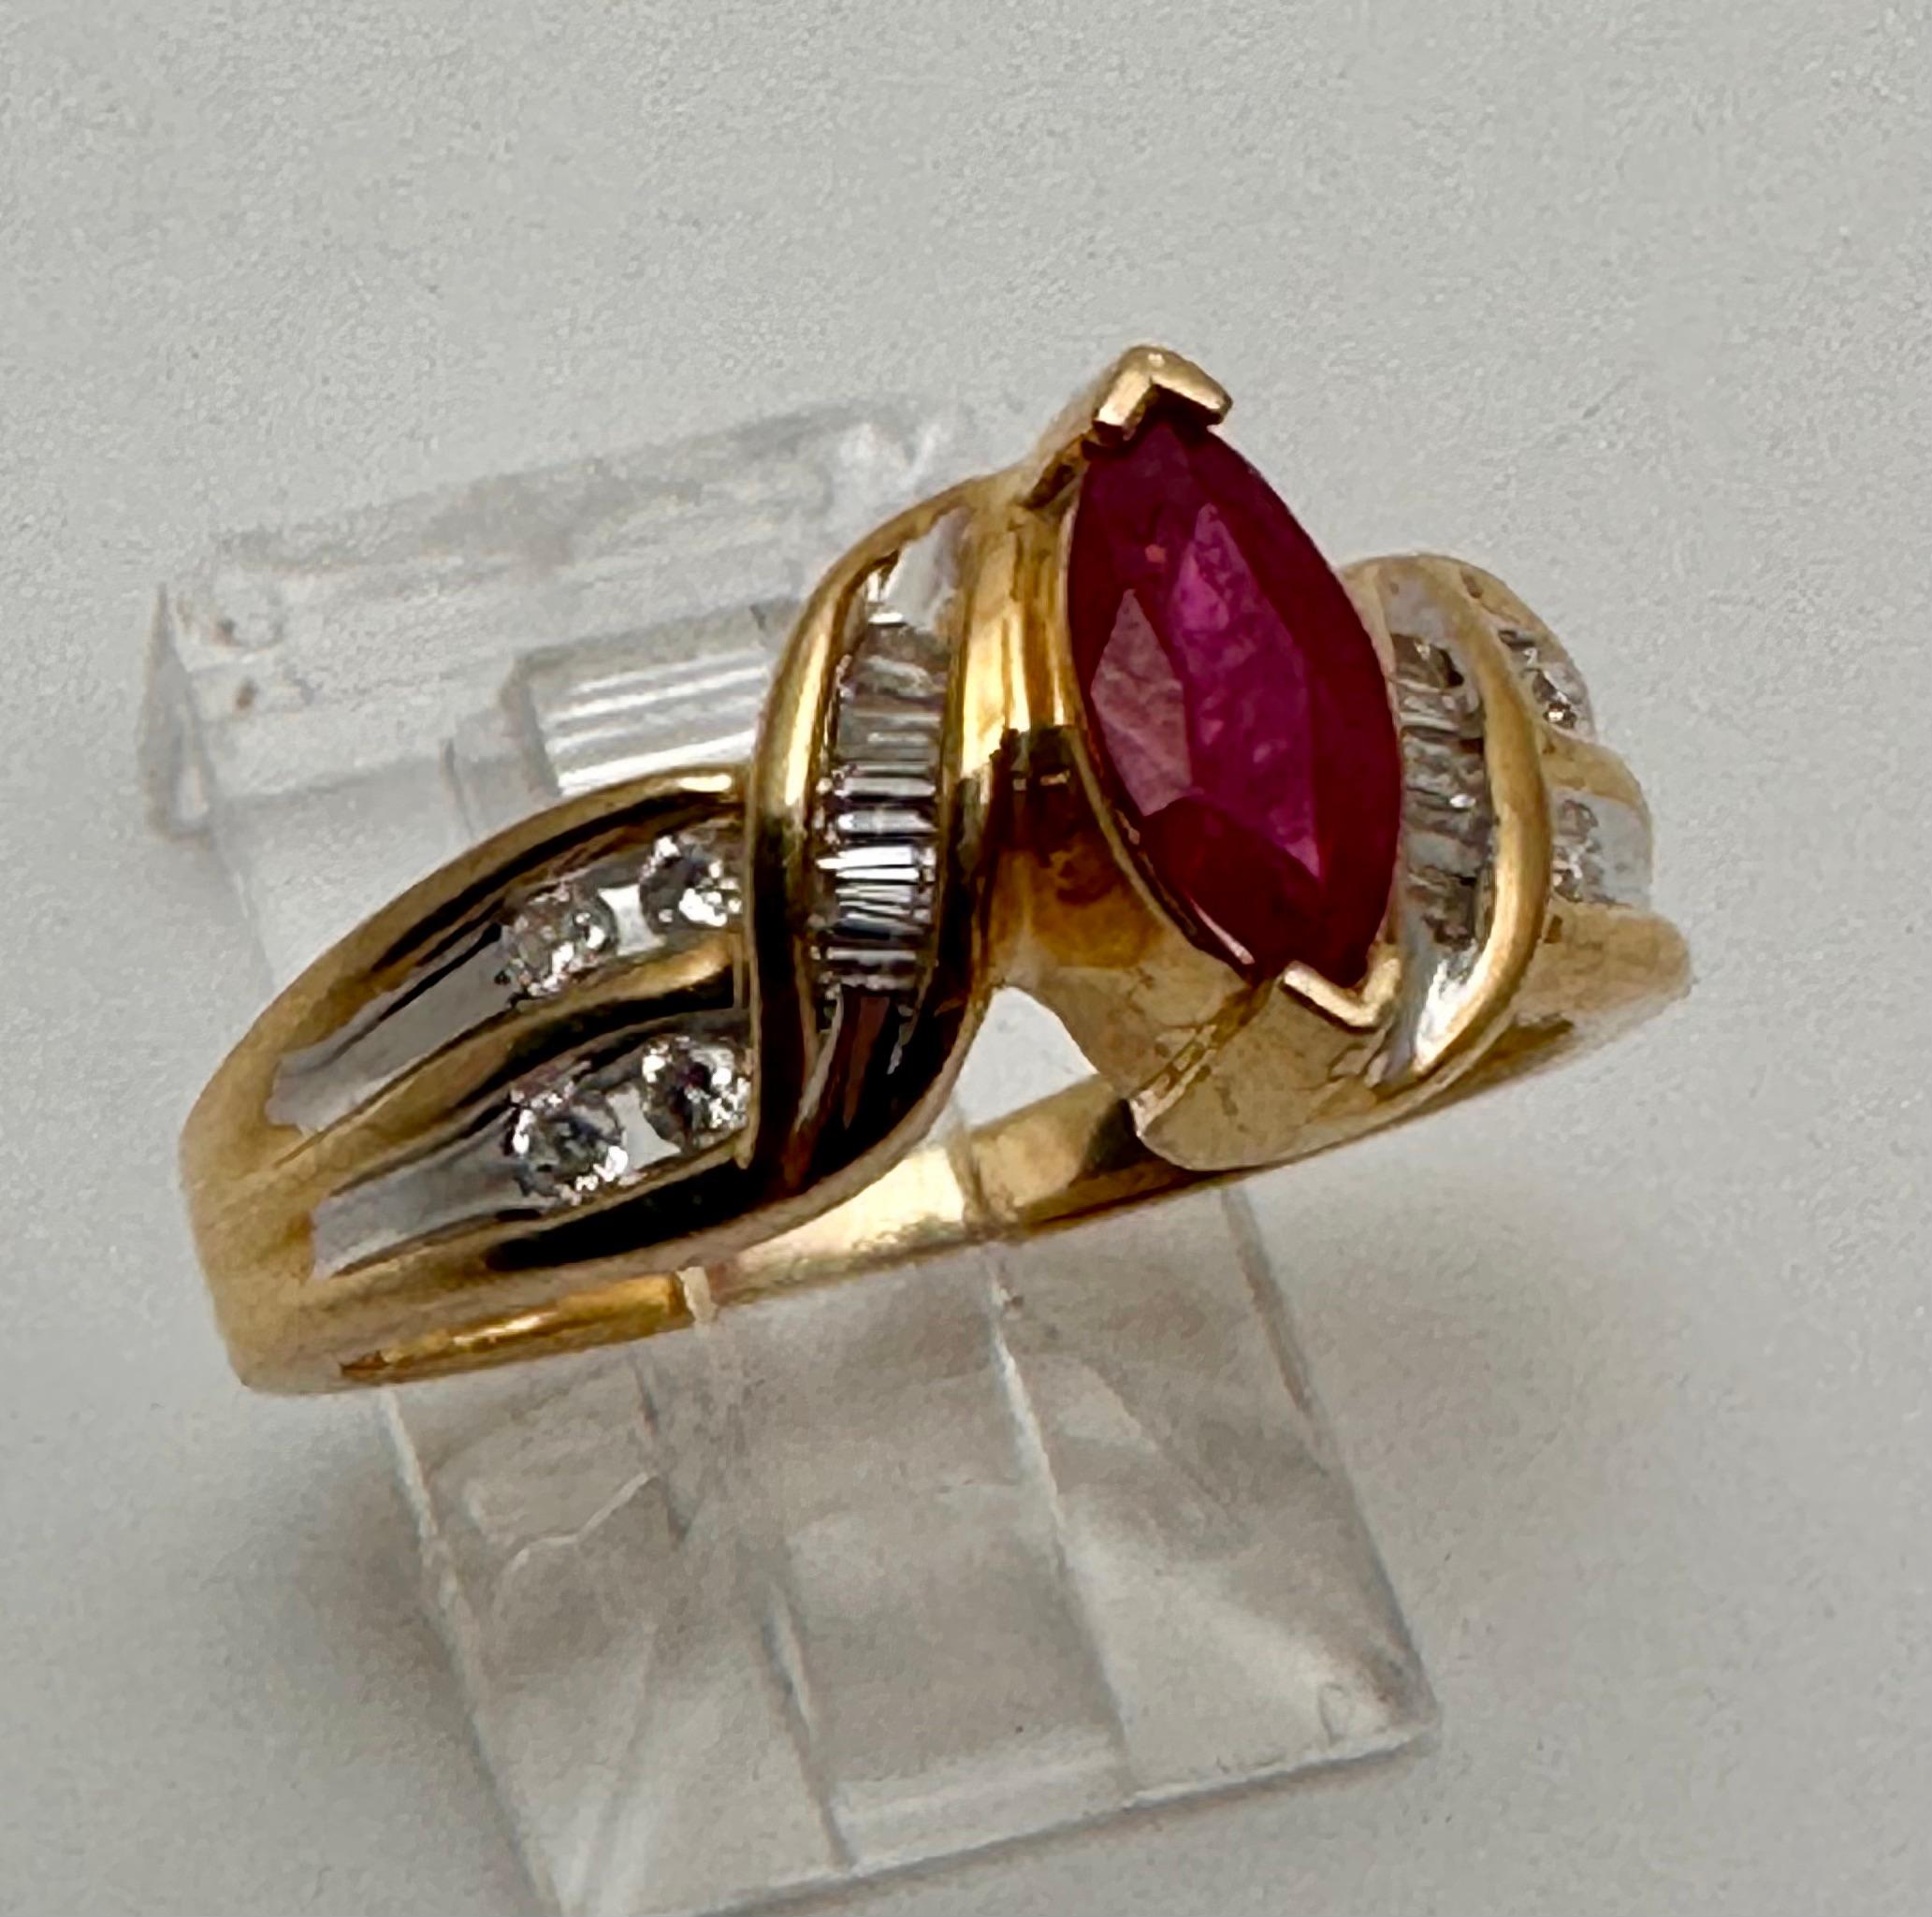 14k Yellow Gold approx. 4mm x 8mm Marquise Ruby Baguettes & Round Diamonds Ring Size 7.

This 14k yellow gold ring features a stunning marquise-shaped ruby as the main stone, surrounded by baguette and round diamonds that add a touch of elegance to